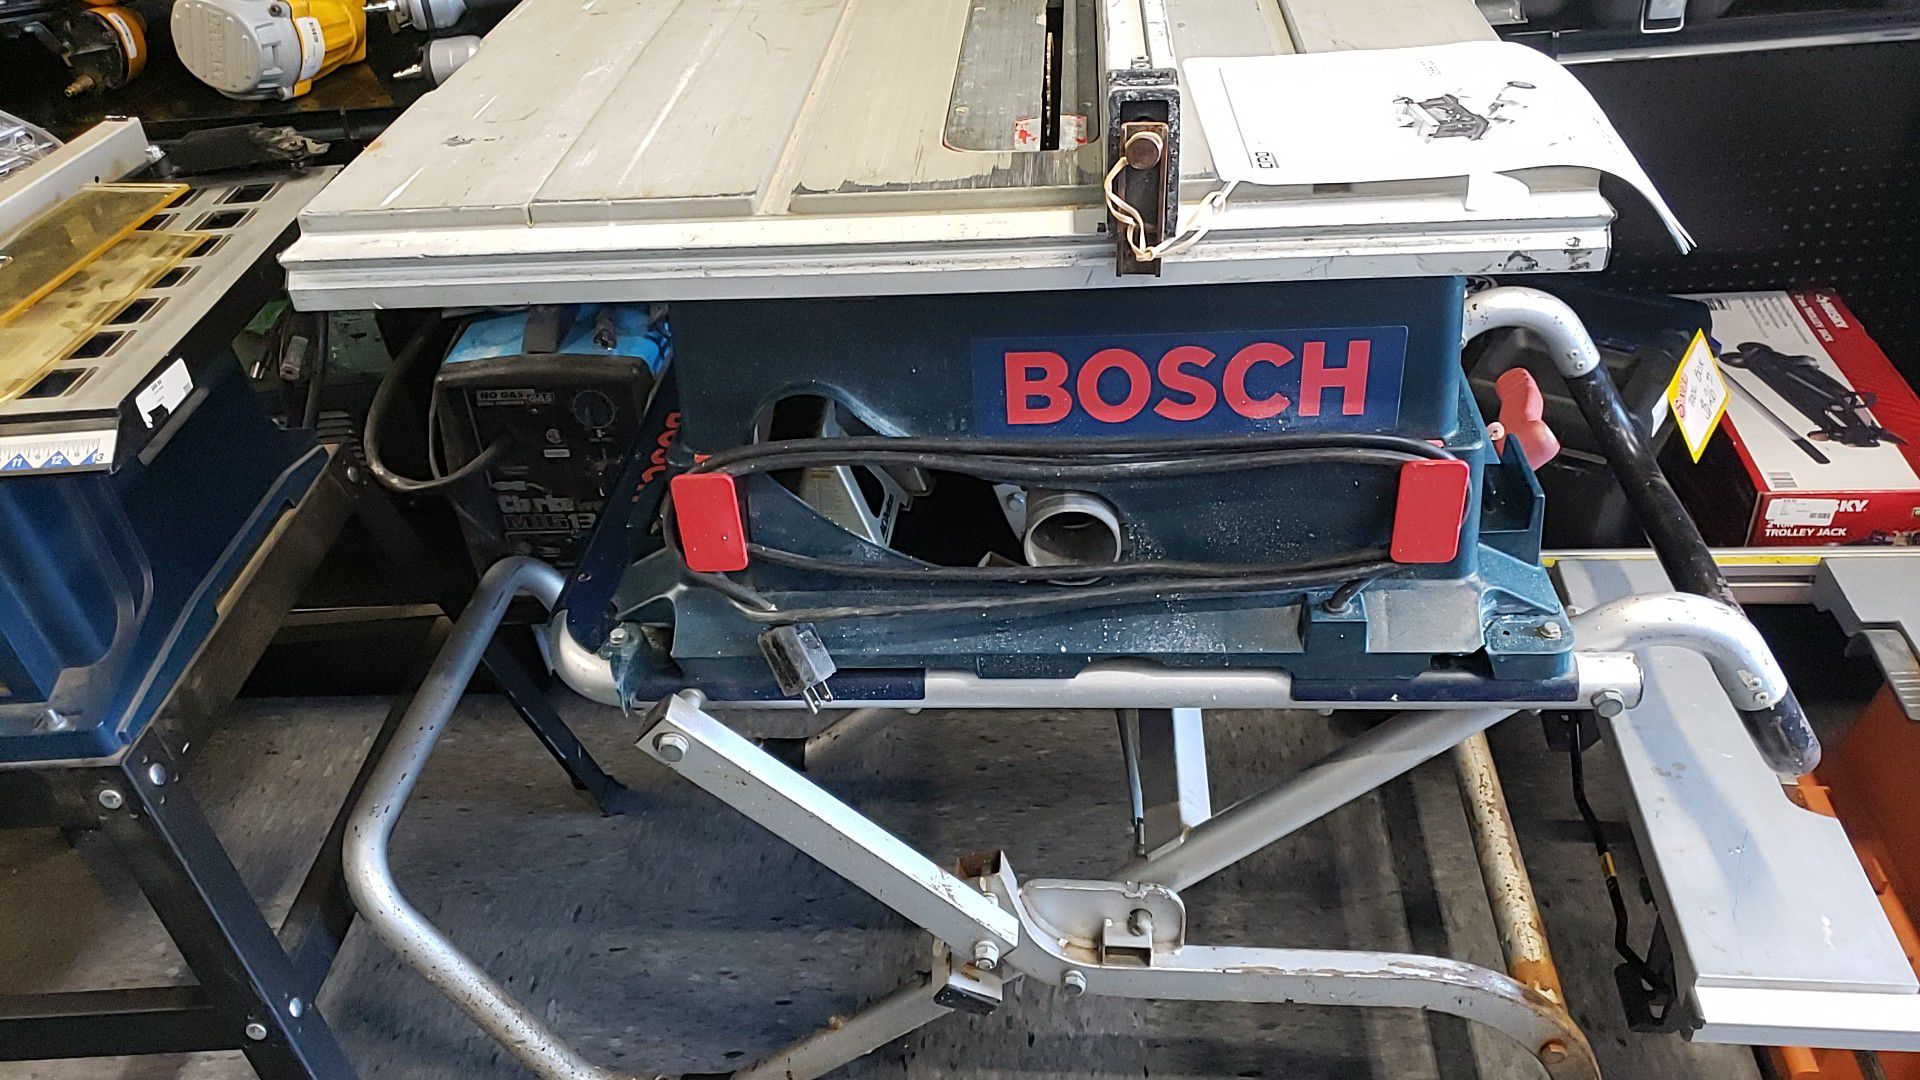 Bosch TS 2000 table saw on stand with wheels